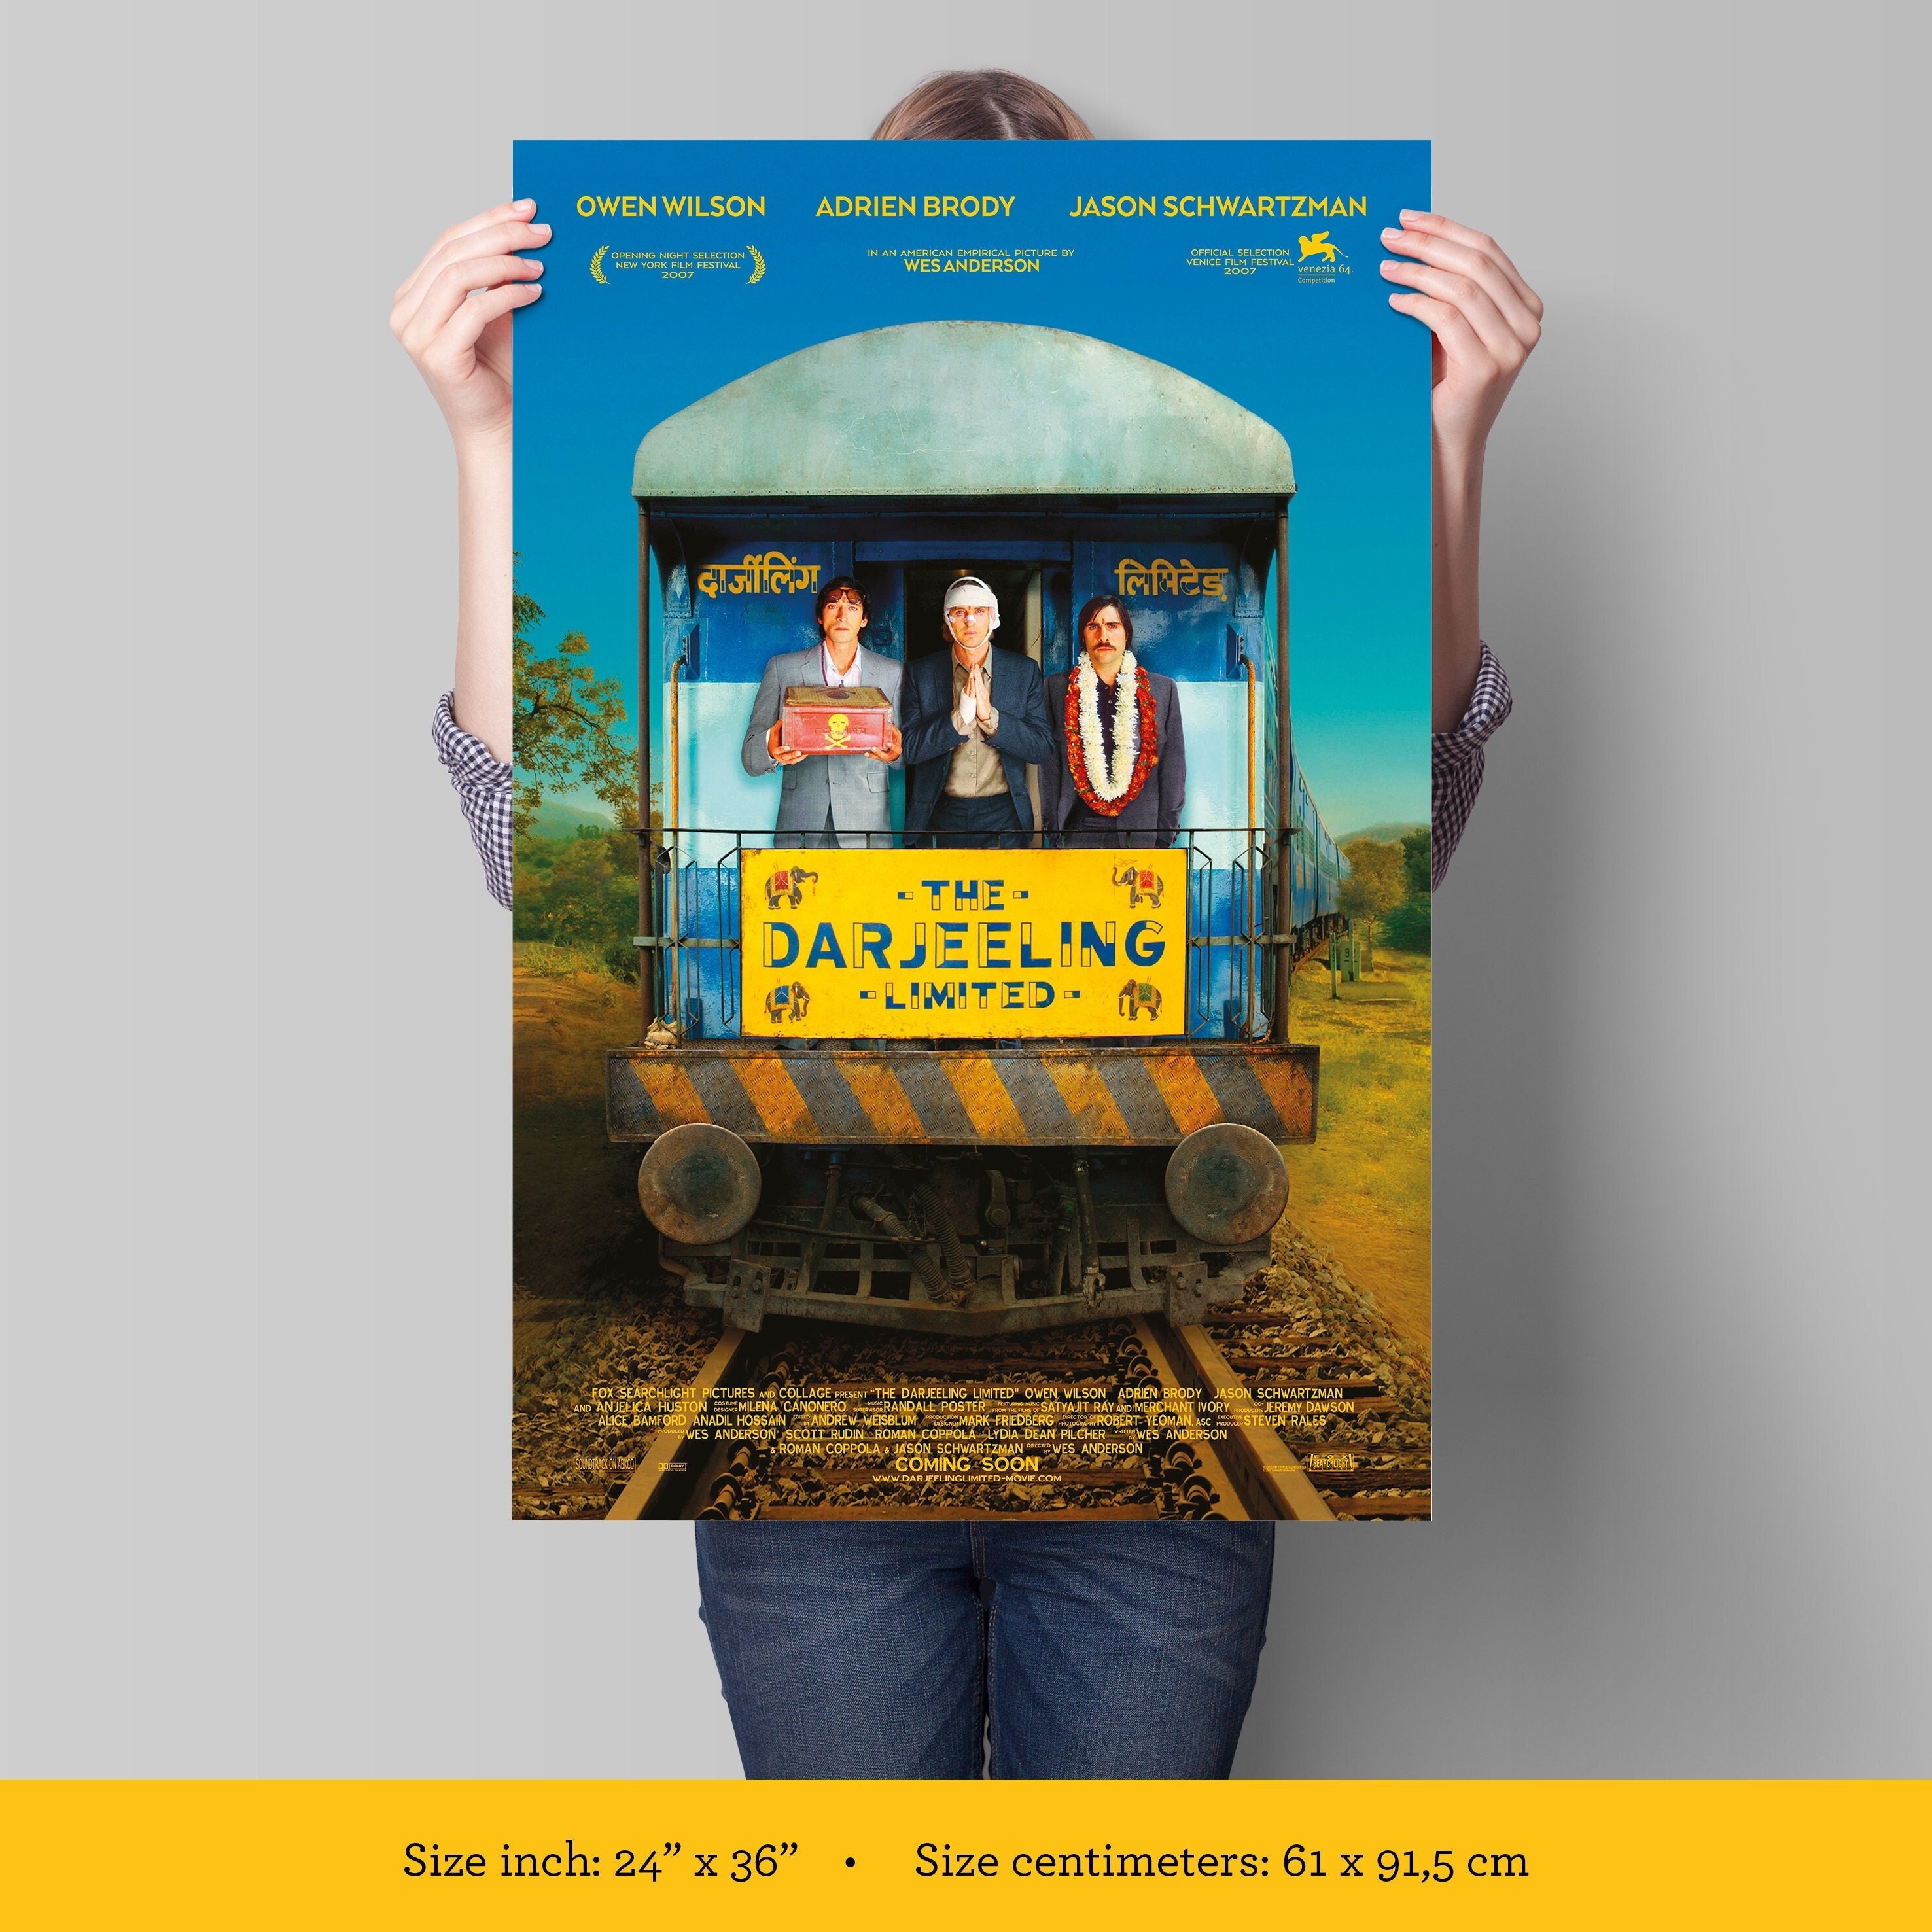  The Darjeeling Limited, Wes Anderson's